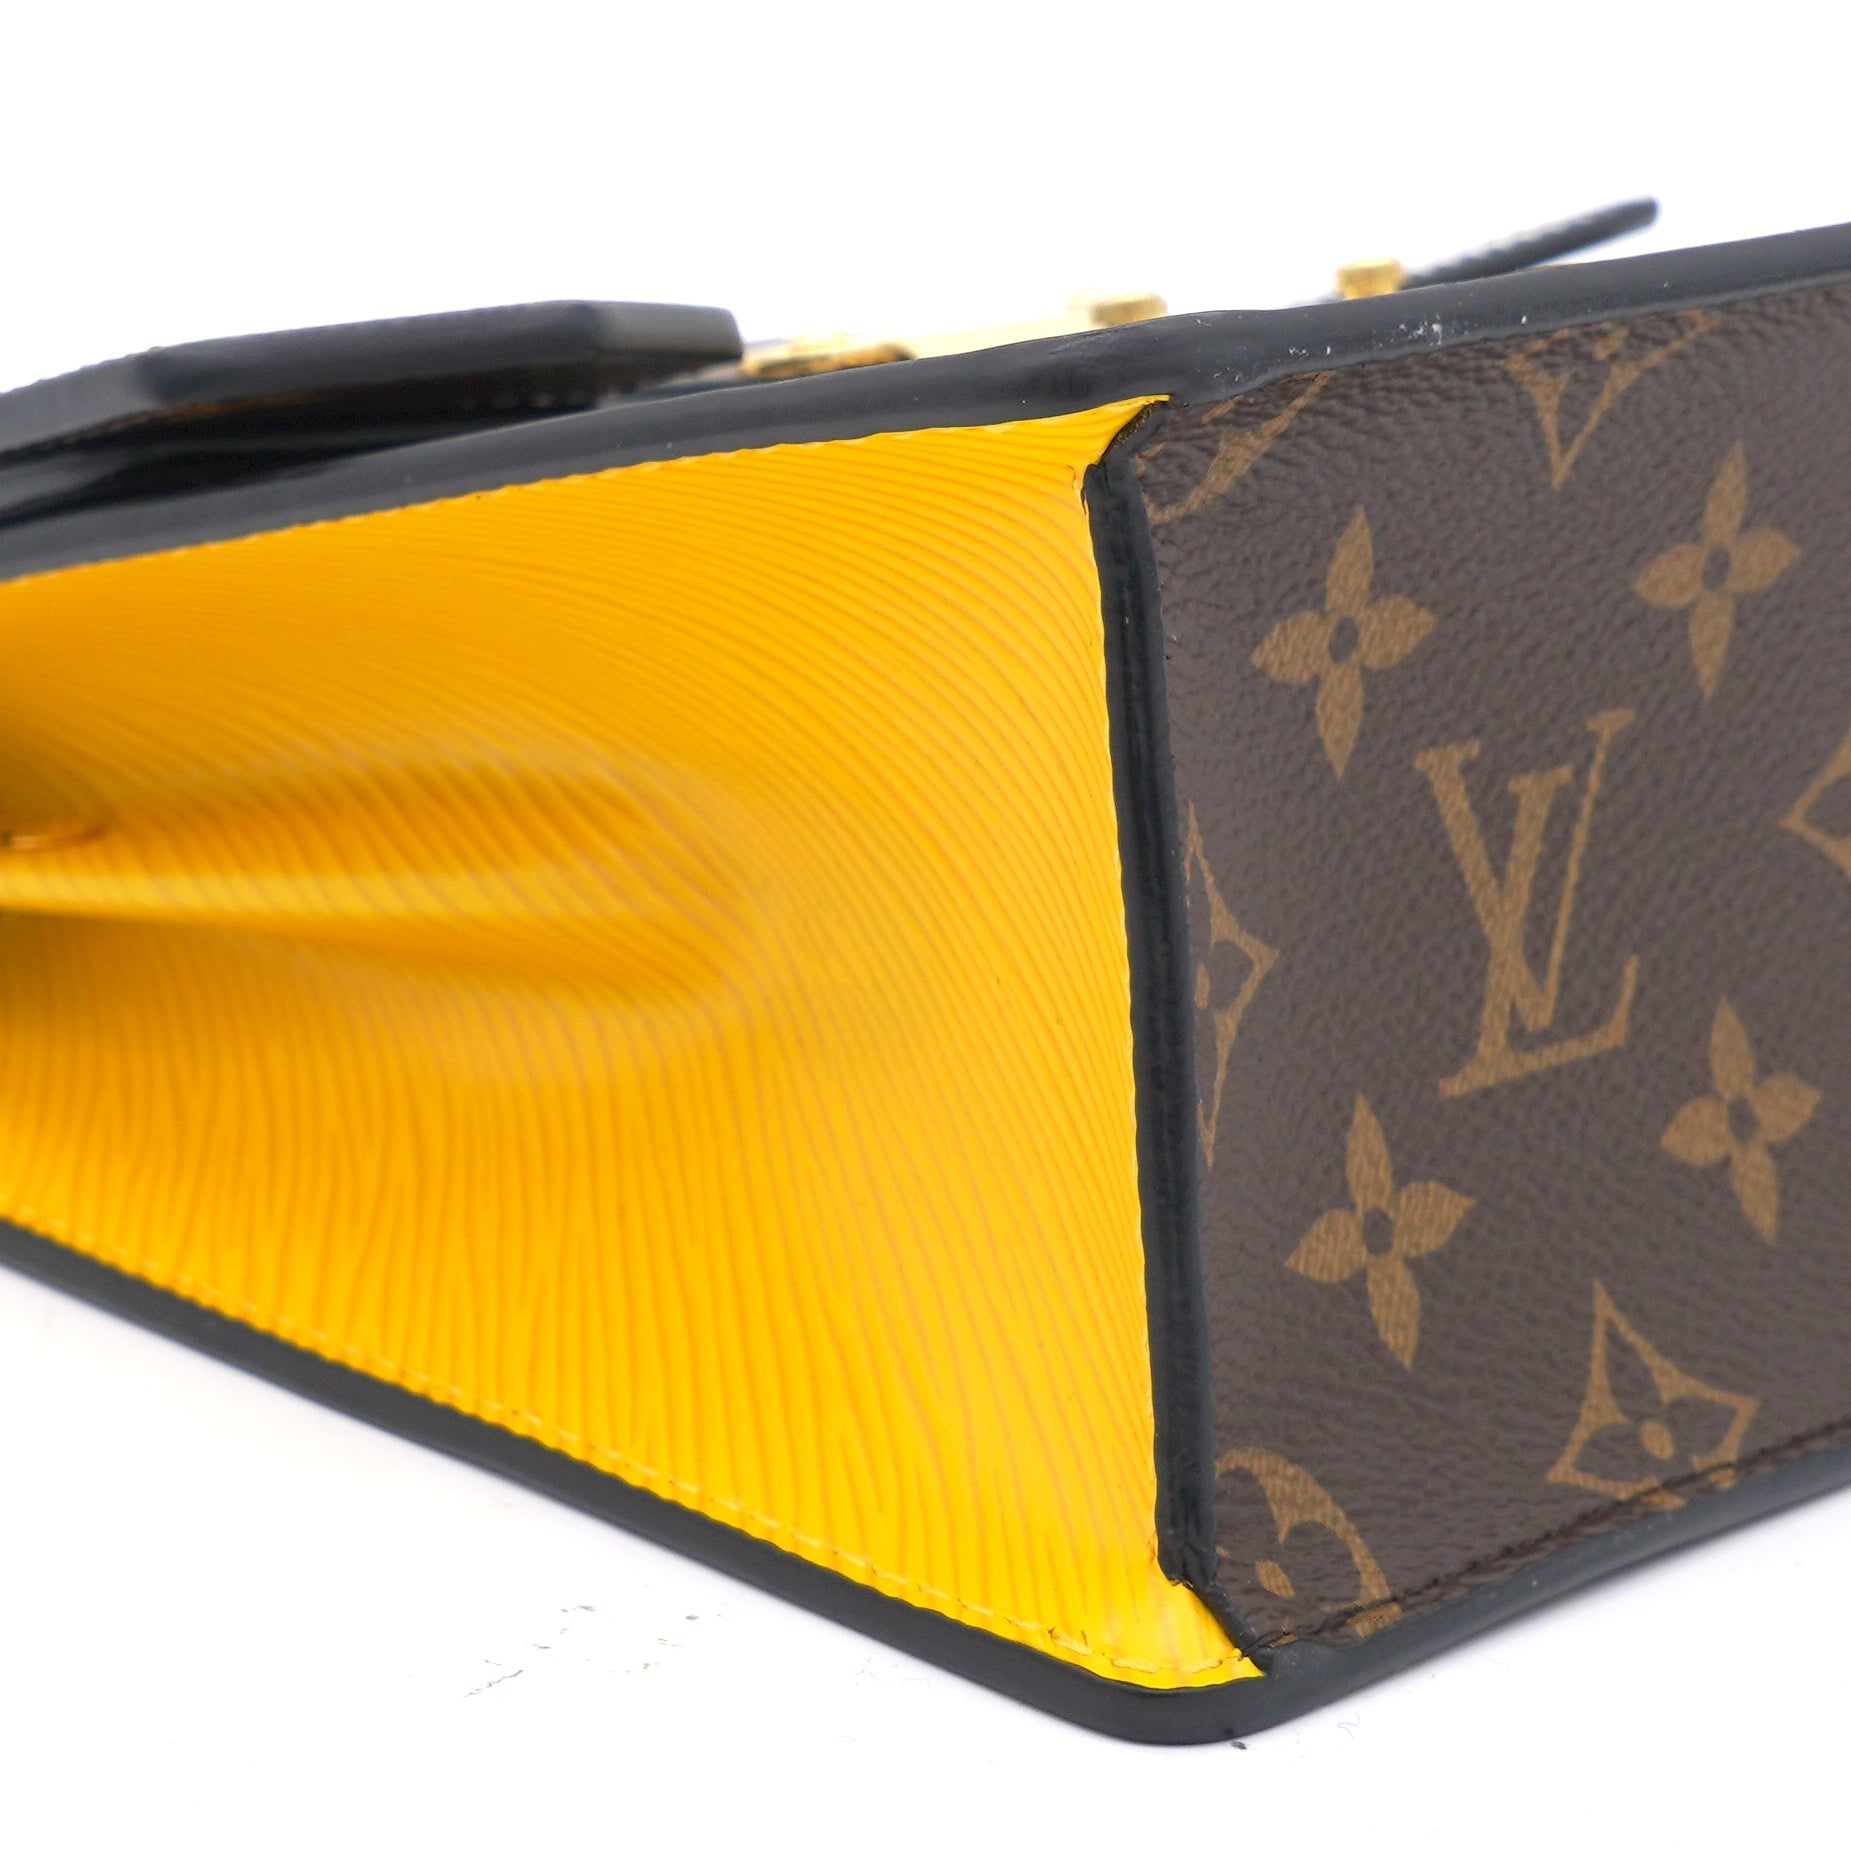 Spring street patent leather handbag Louis Vuitton Yellow in Patent leather  - 24914230